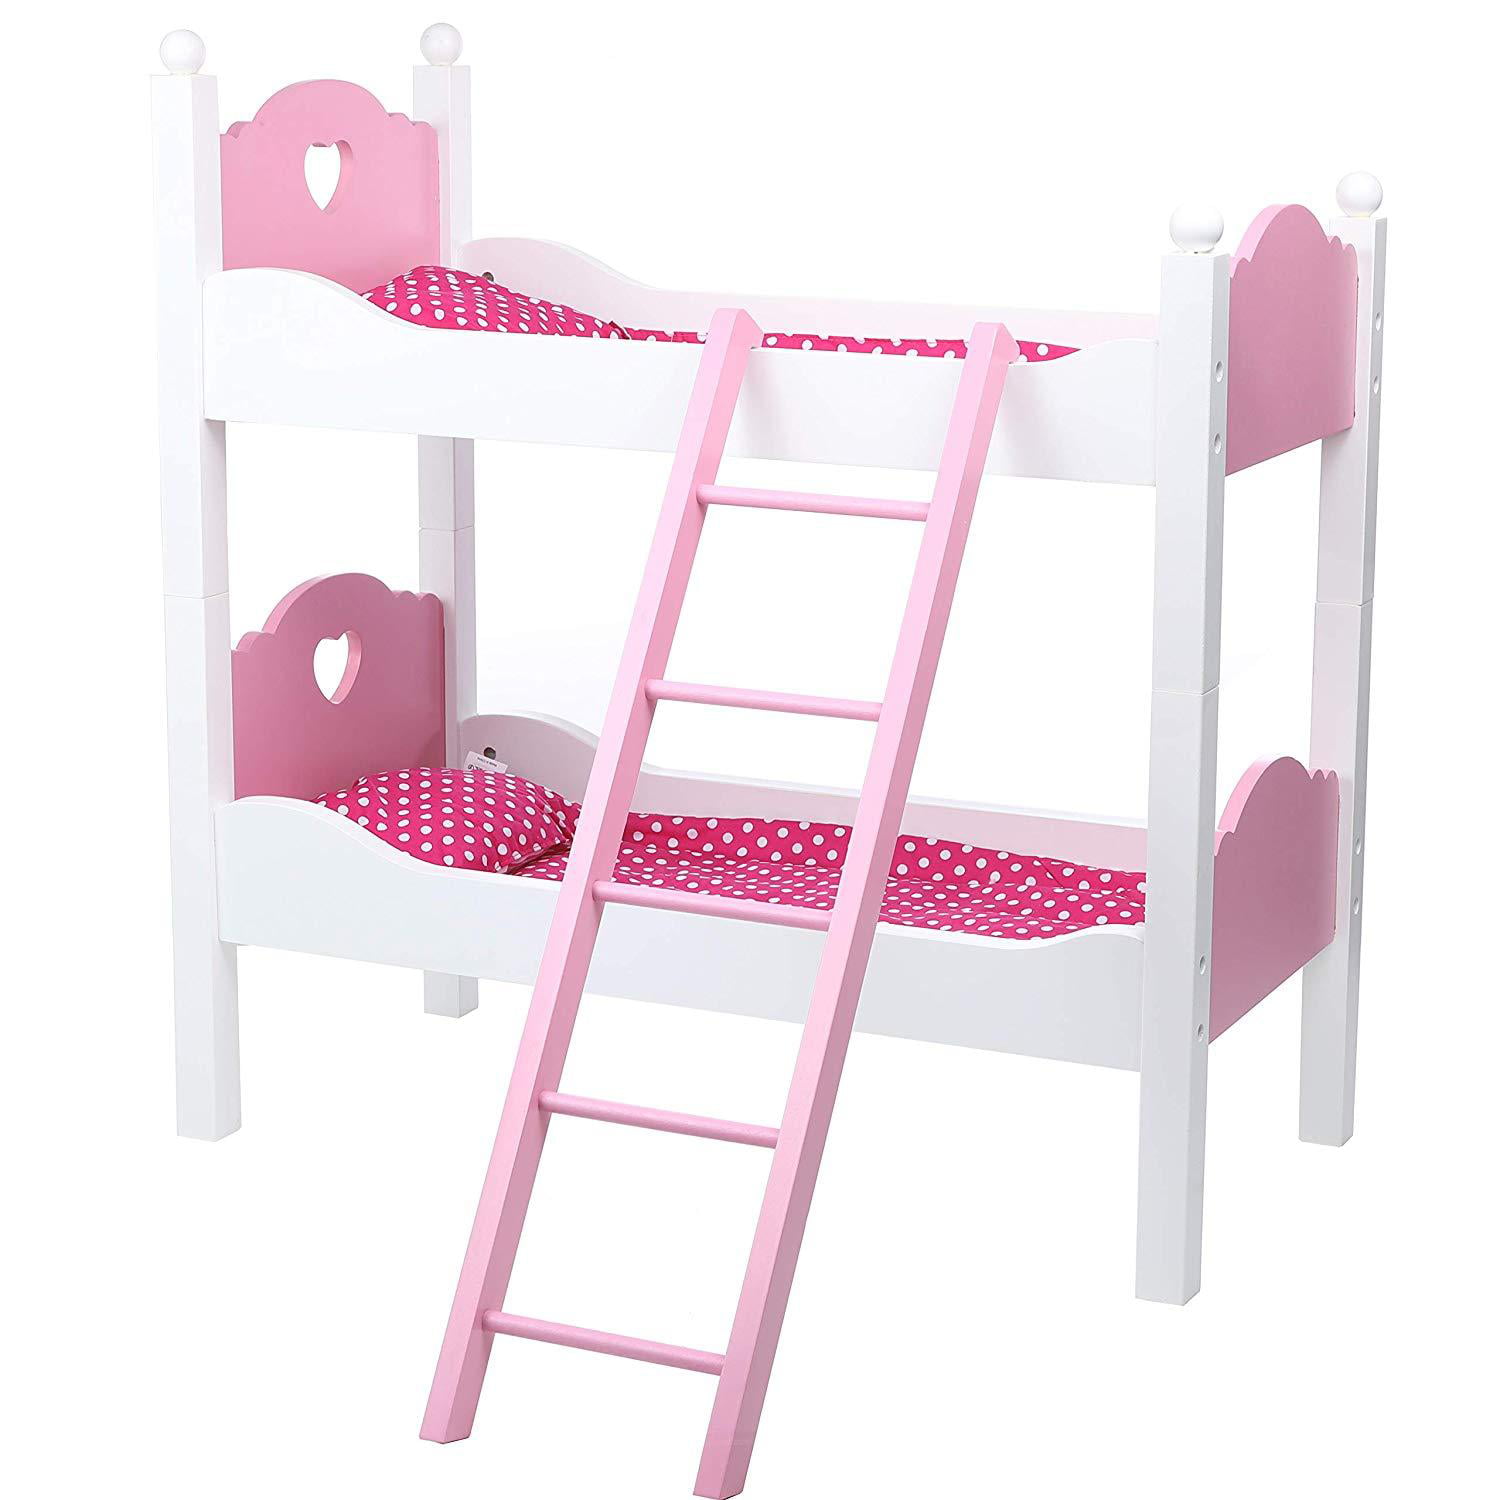 Beverly Hills Doll Bunk Bed For Twin, Extra Tall Bunk Beds